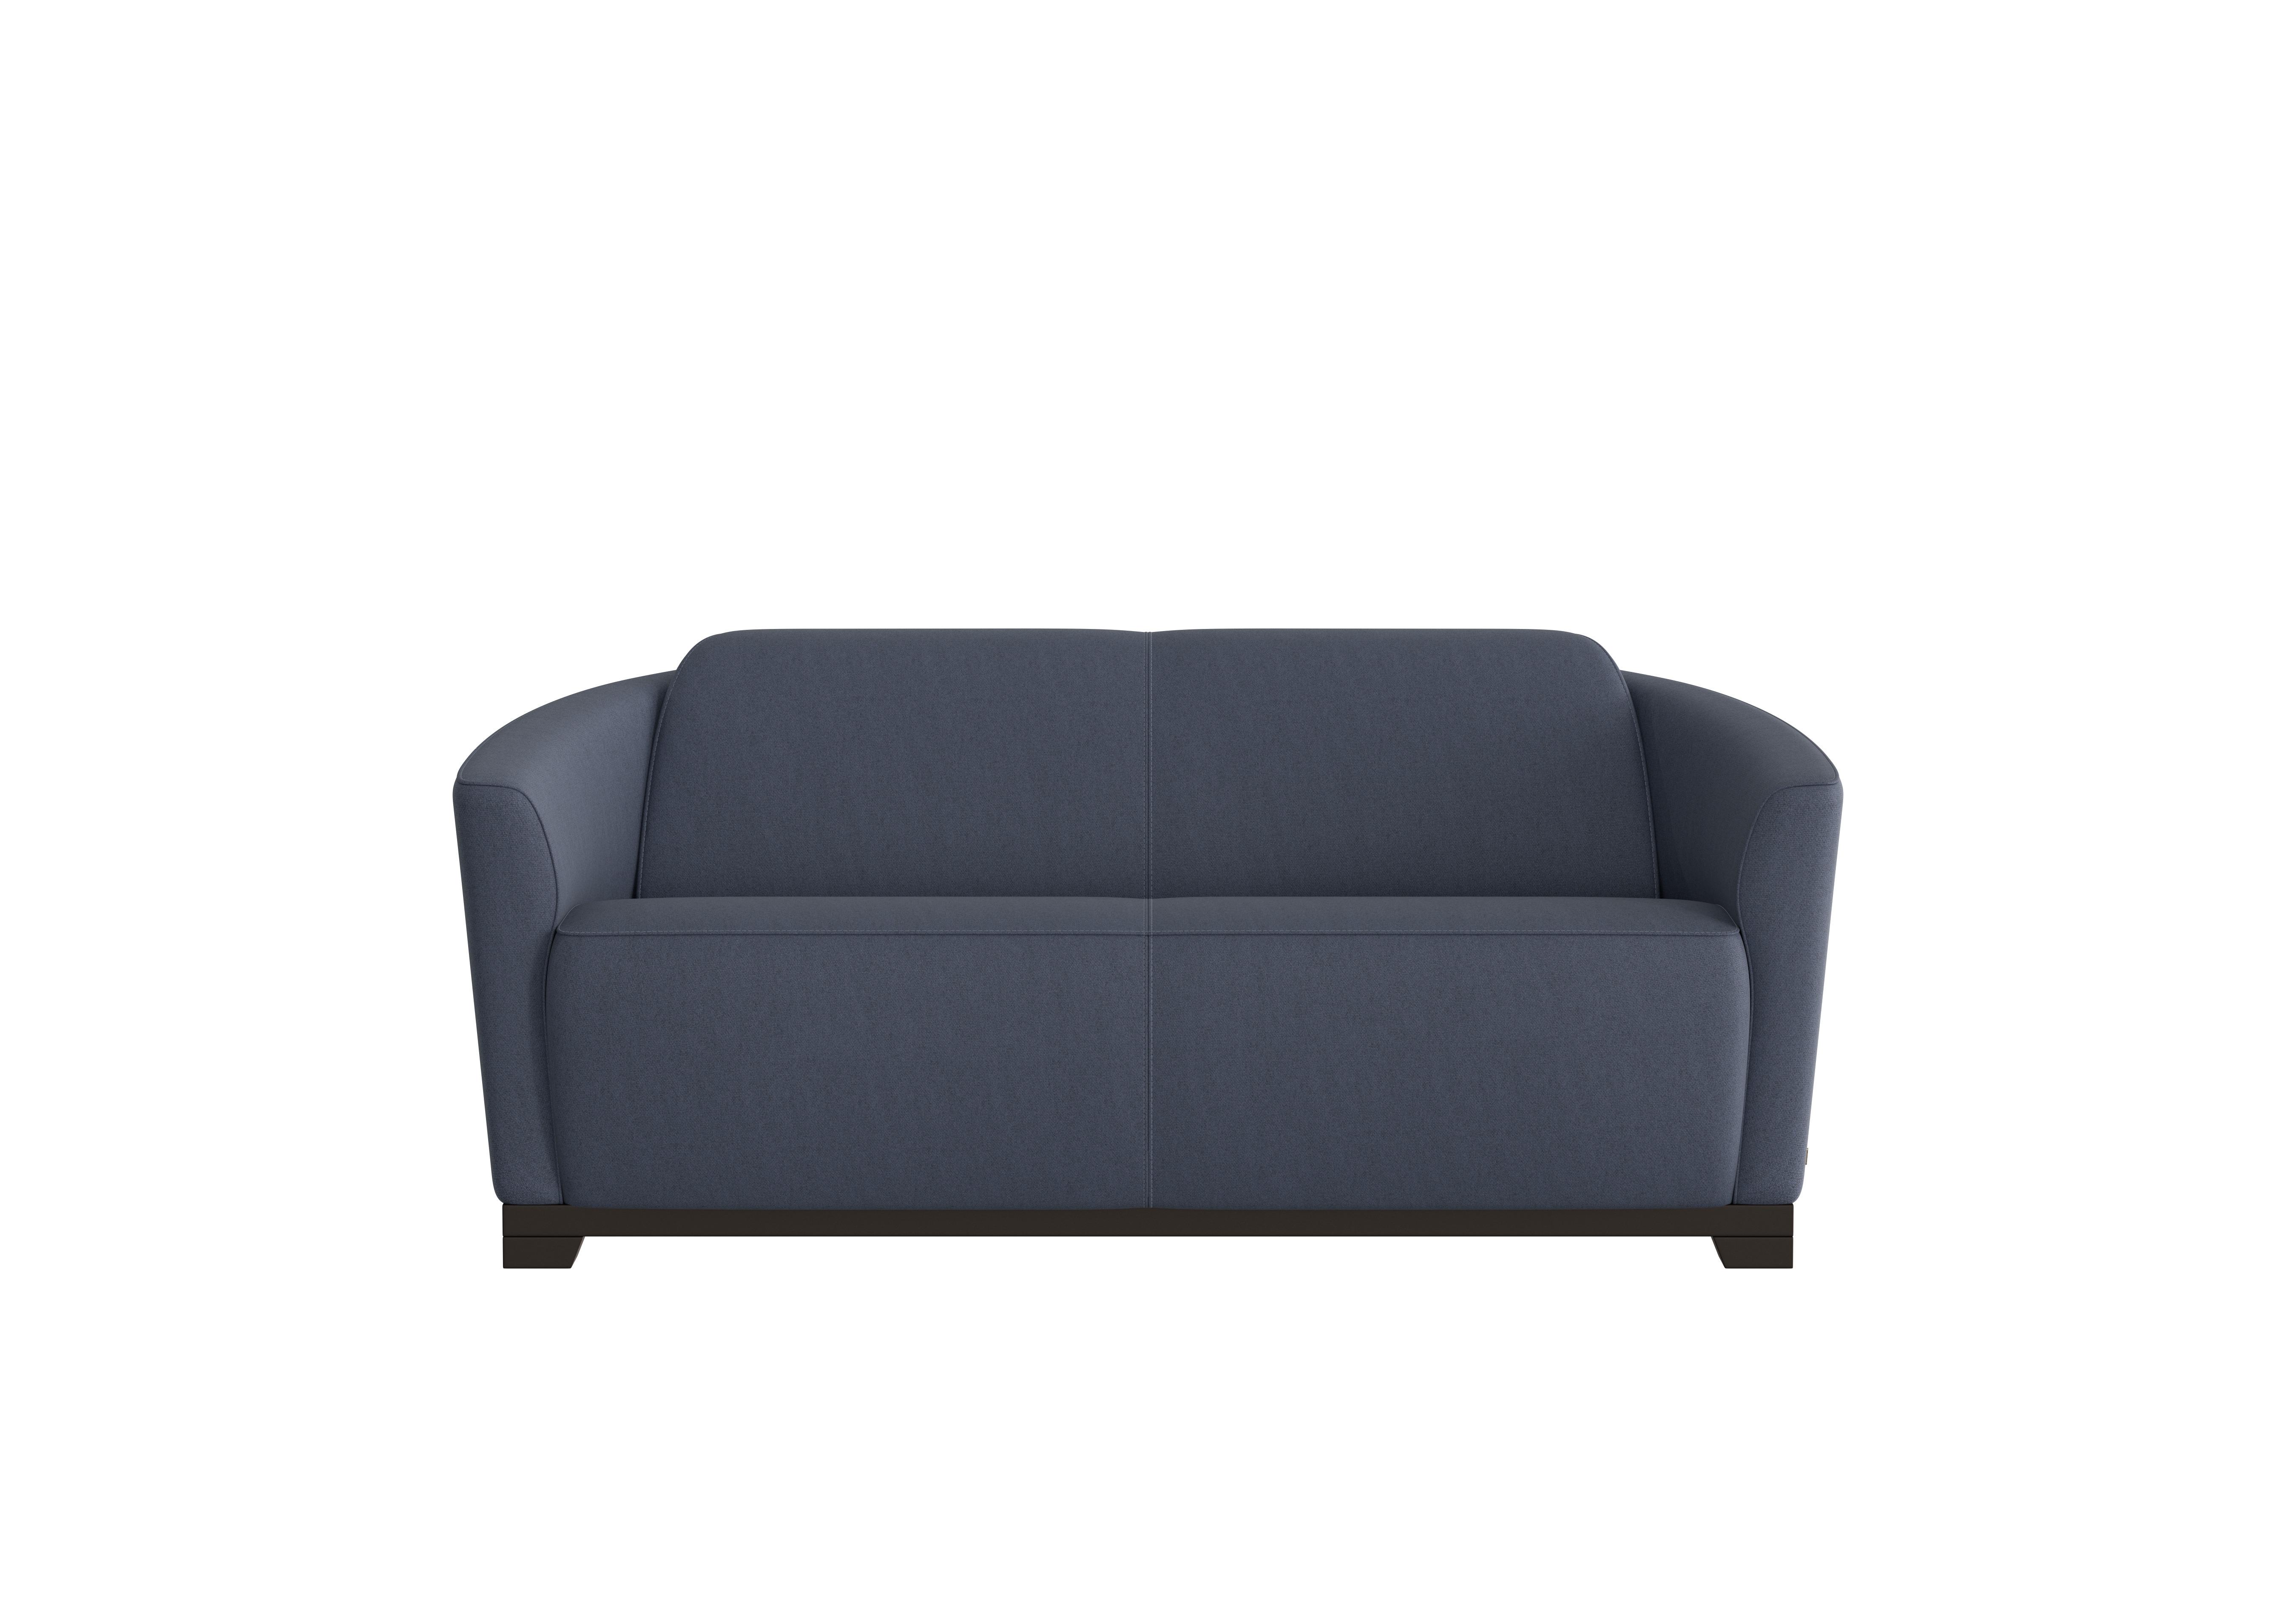 Ketty 2.5 Seater Fabric Sofa in Fuente Ocean on Furniture Village